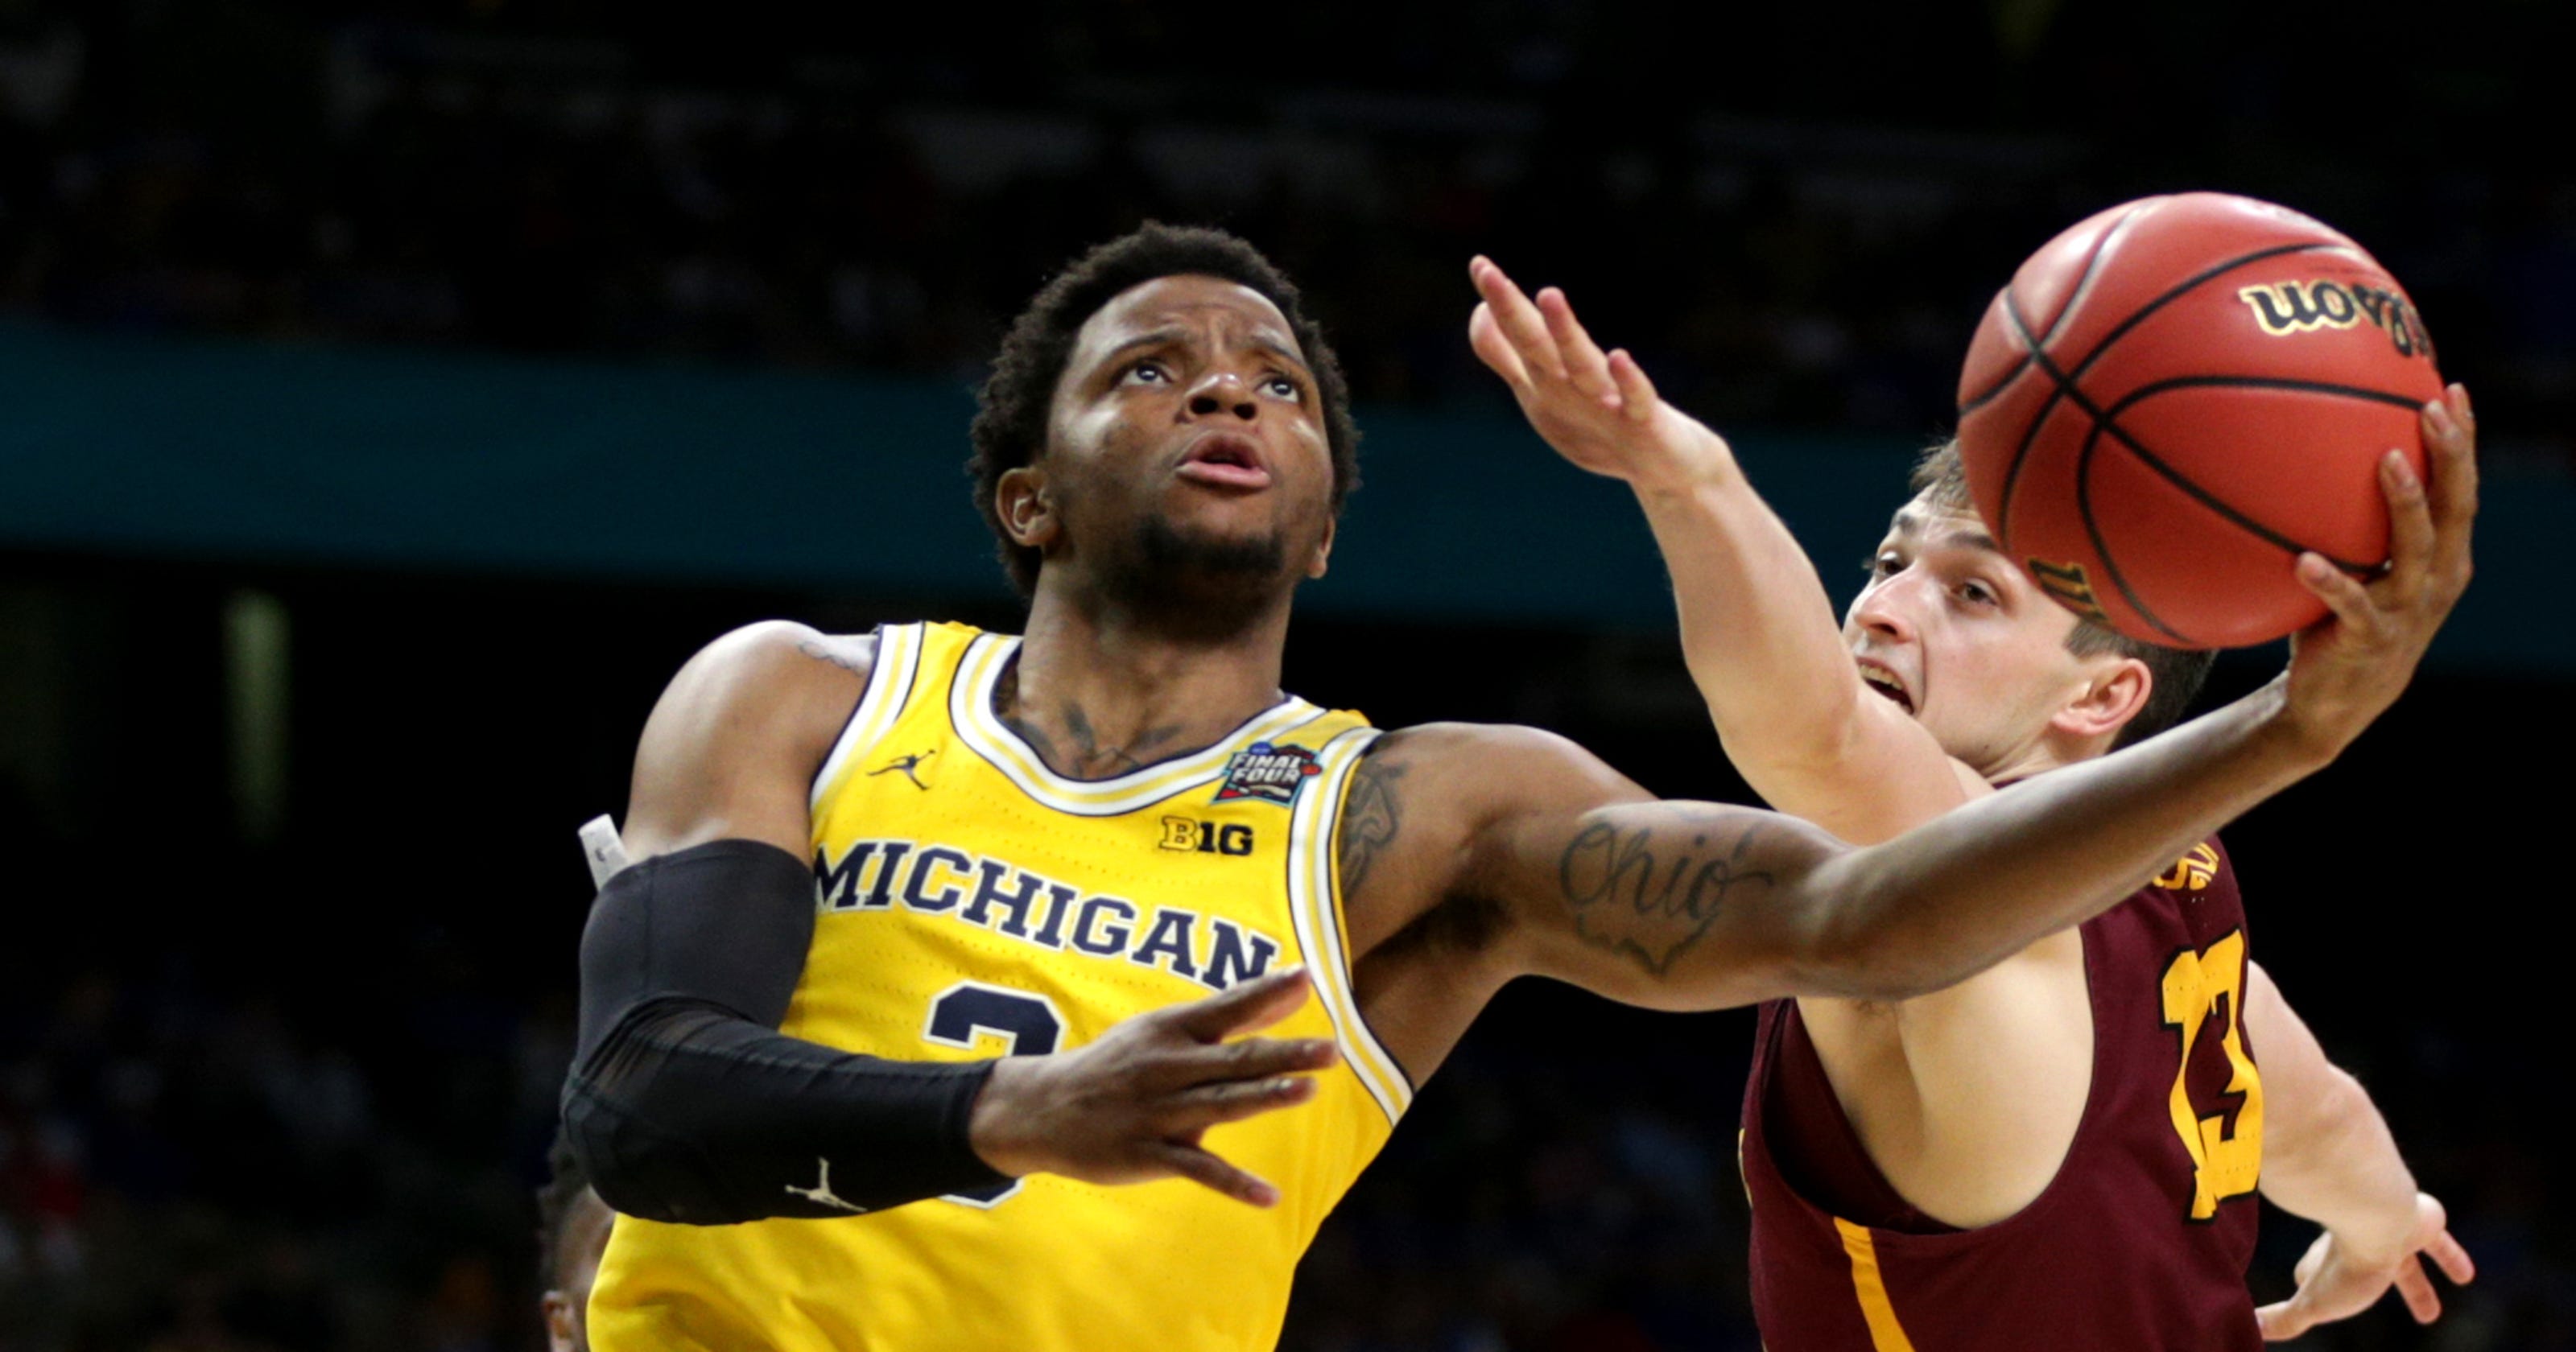 Michigan basketball recap and what's next for 2018-19